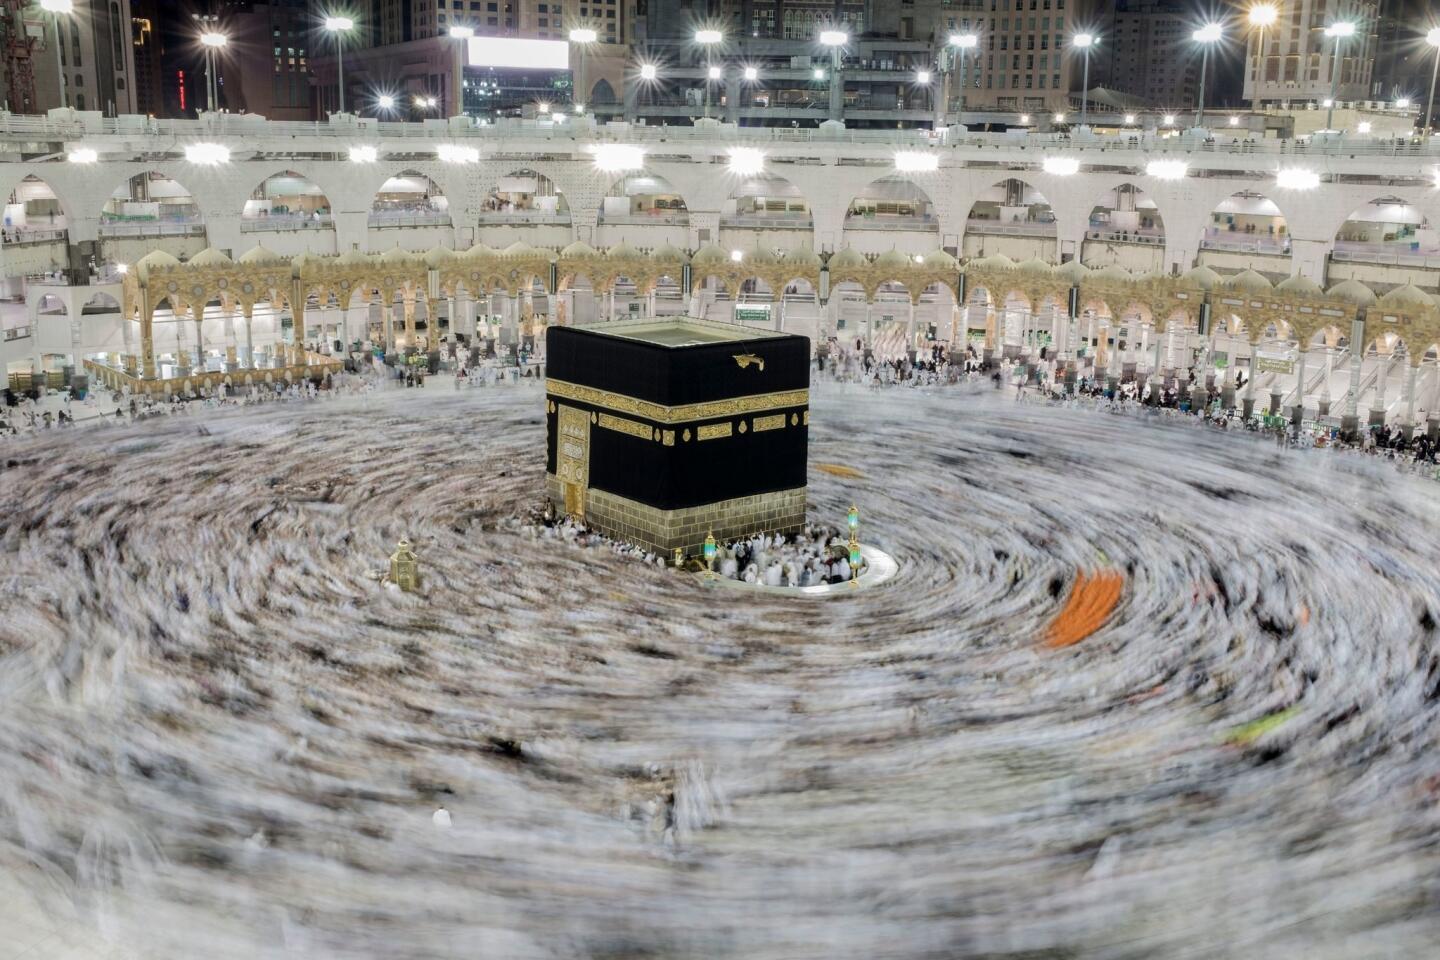 Saudi Arabia: Muslim pilgrims circumvent the Kaaba at the Grand Mosque on the first day of Eid al-Adha in Mecca.